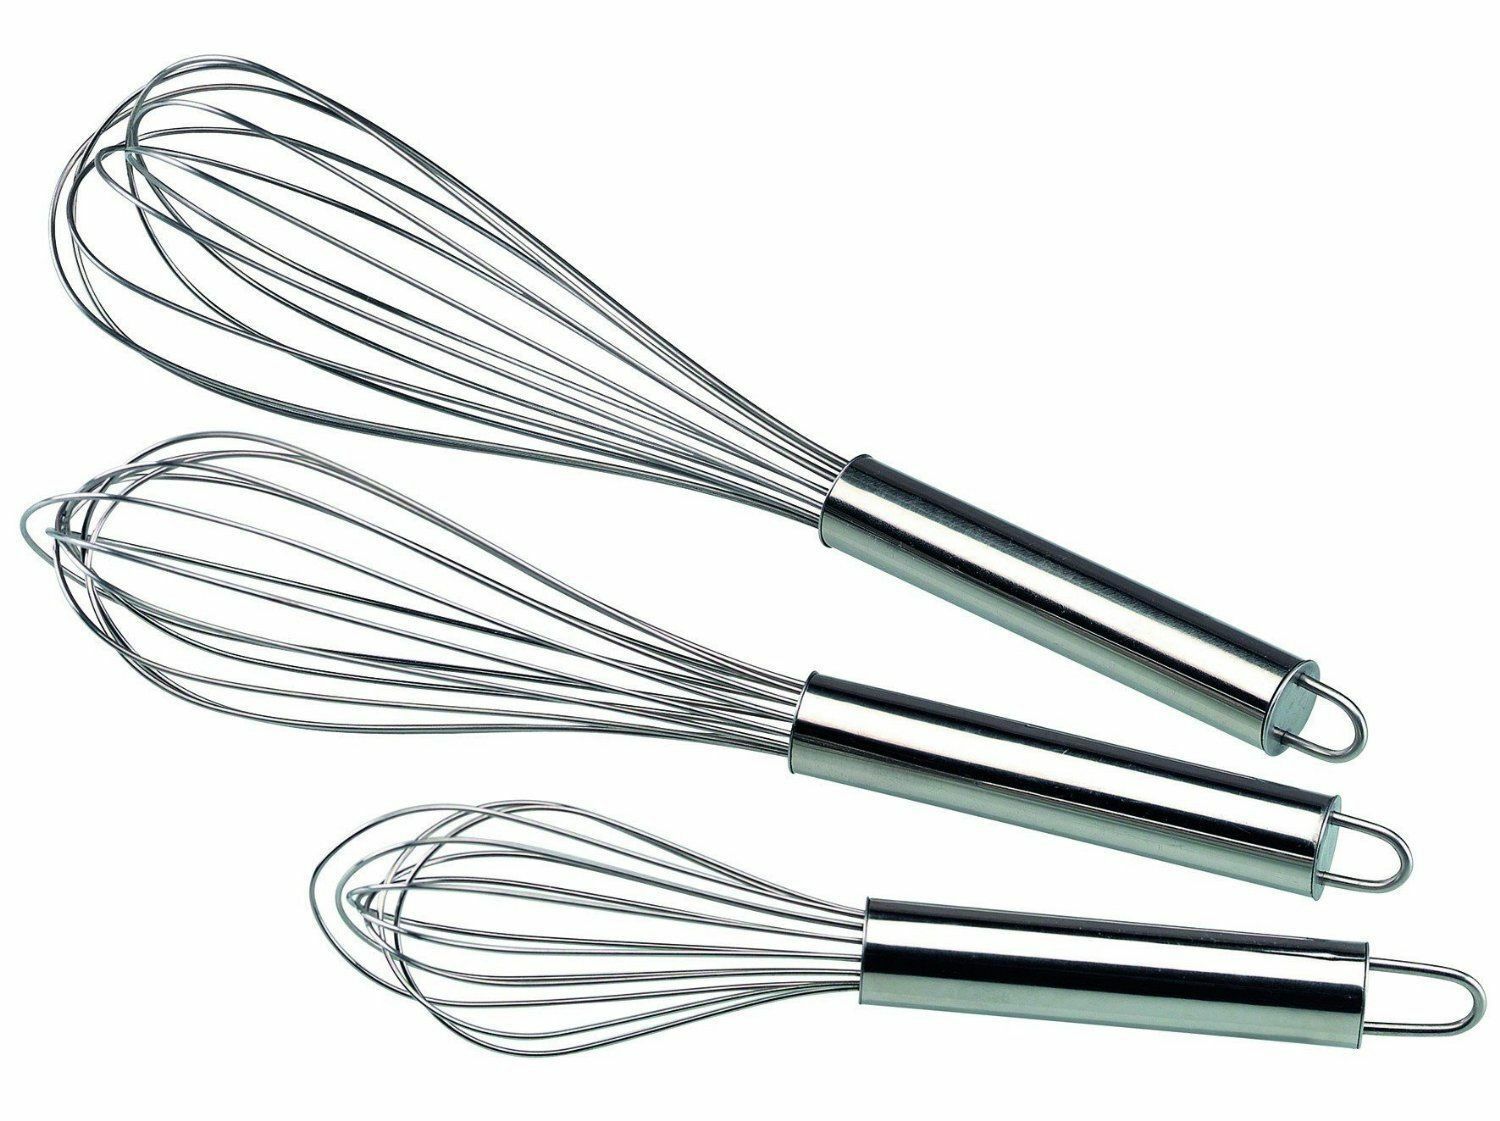 Set of 3 Stainless Steel Balloon Wire Whisks- 8/10/12 inch